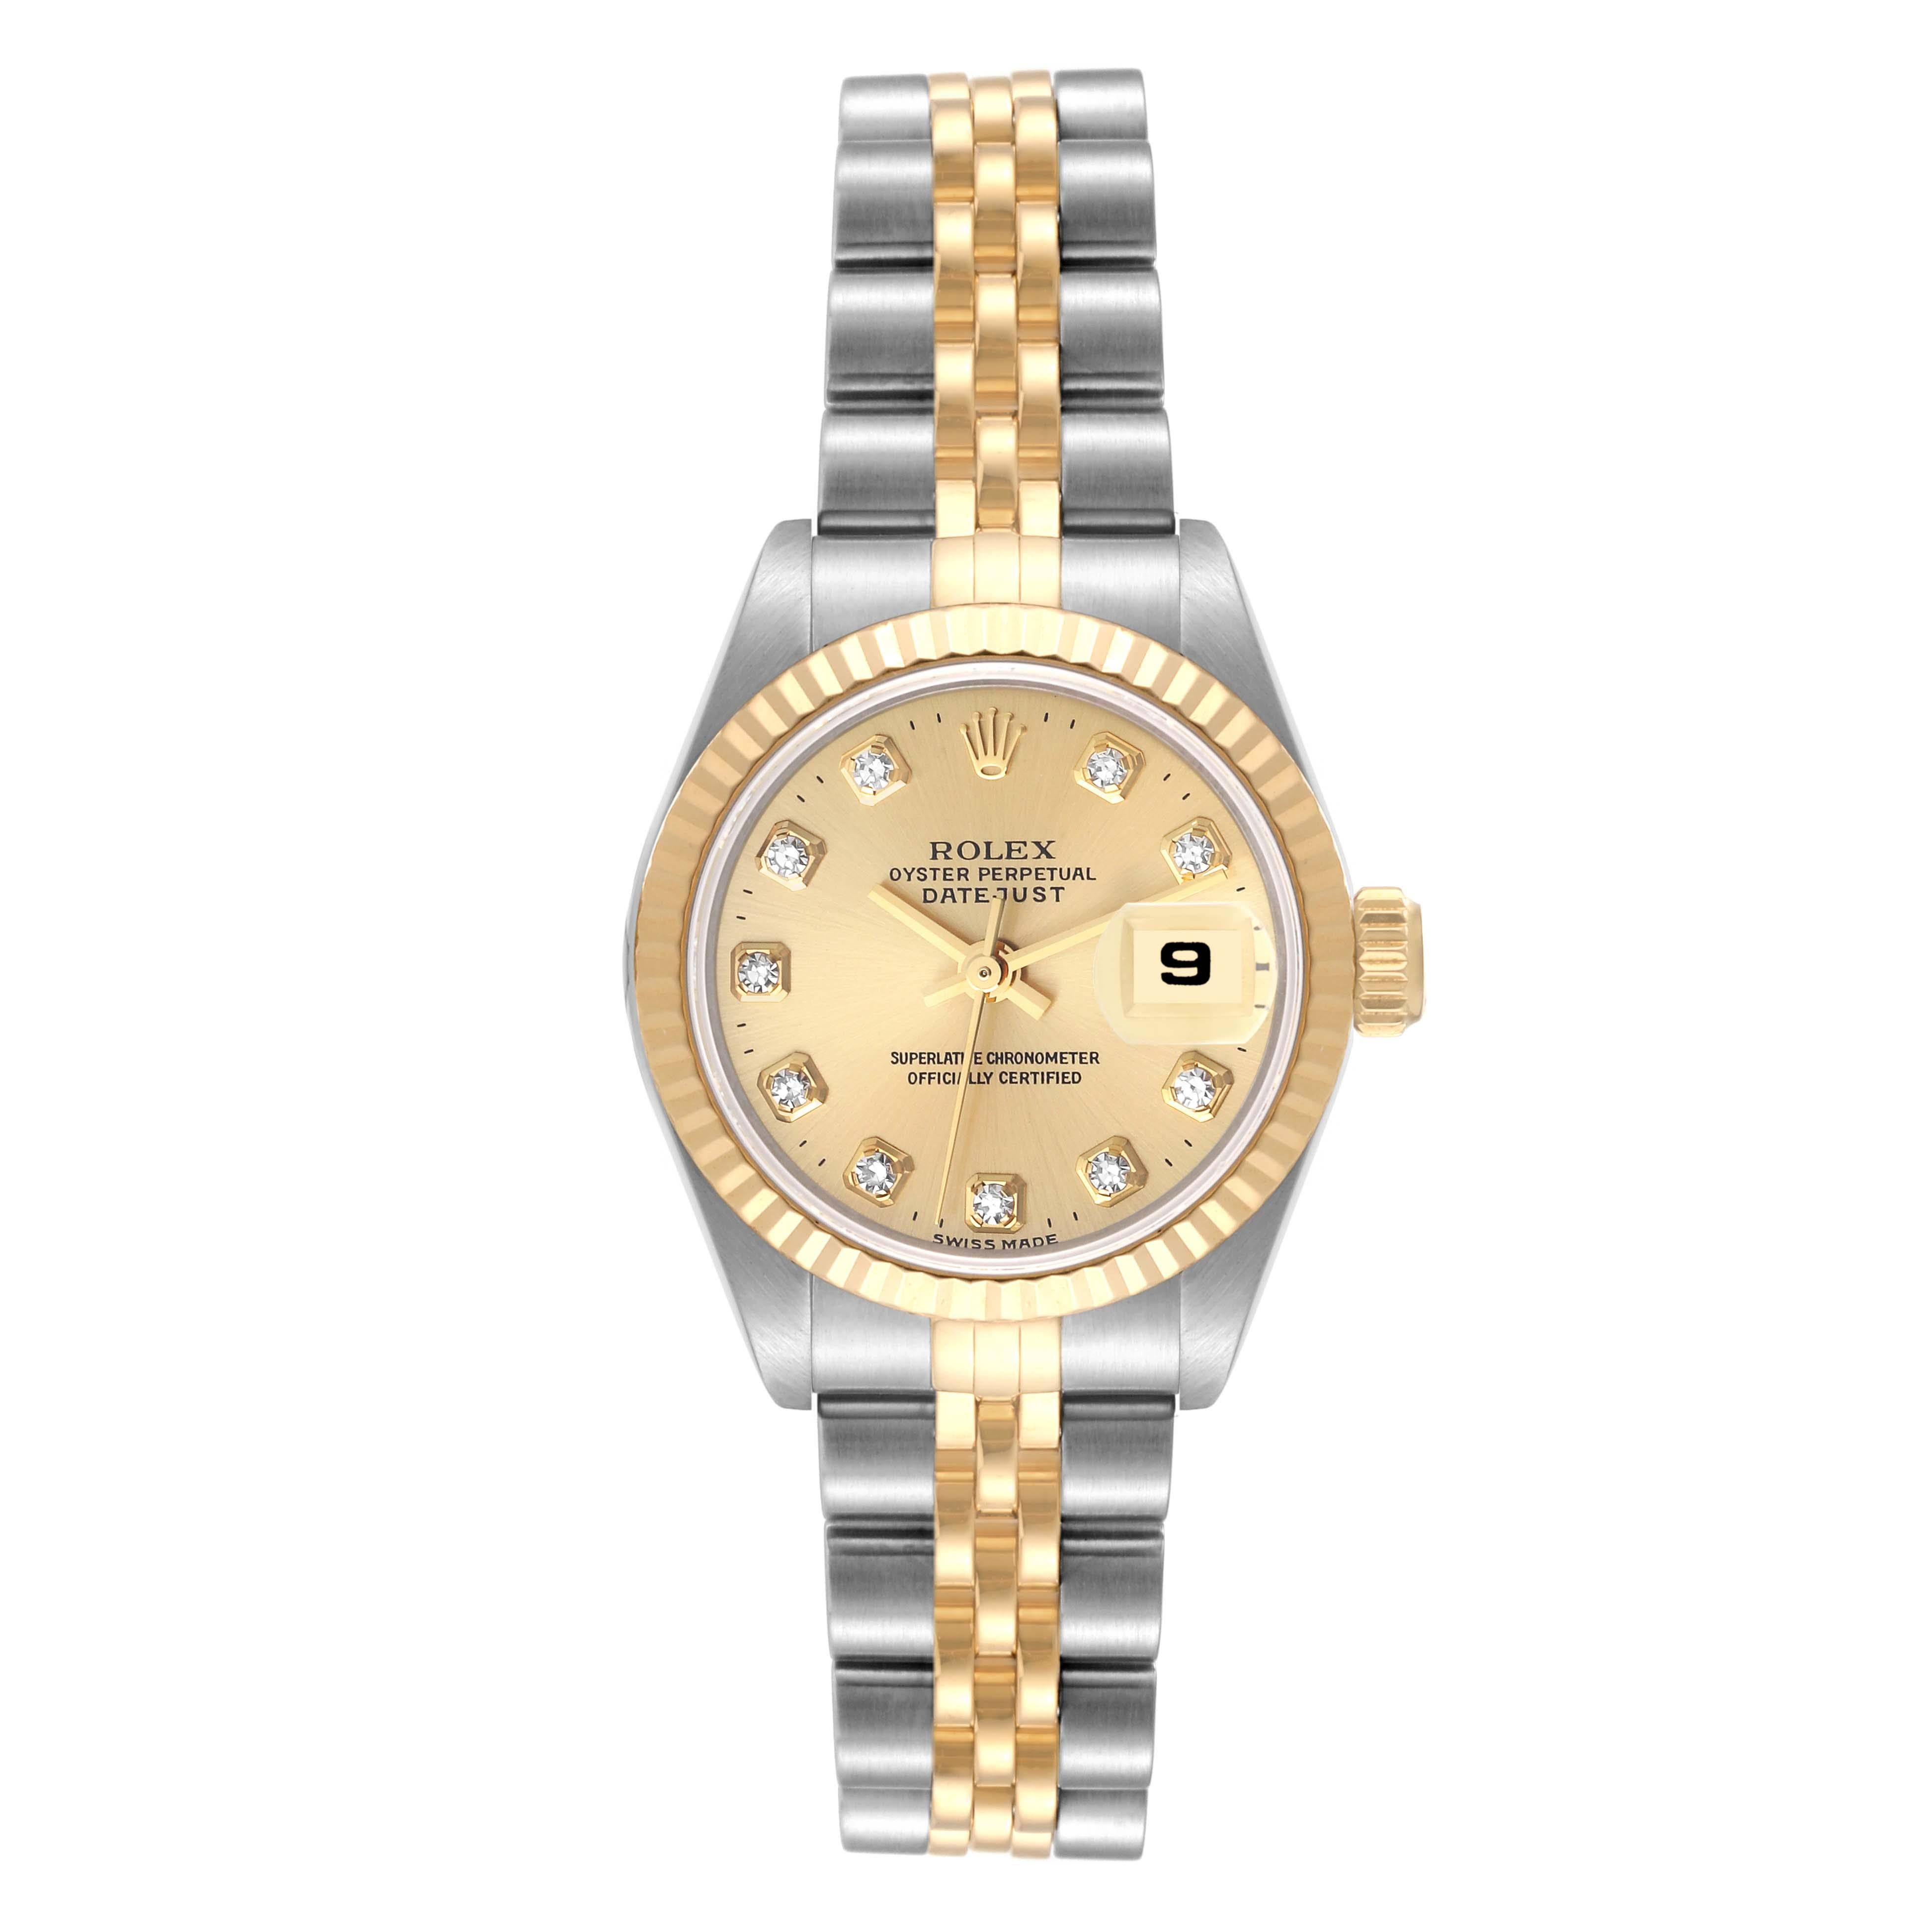 Rolex Datejust Steel Yellow Gold Diamond Dial Ladies Watch 69173 Box Papers. Officially certified chronometer automatic self-winding movement. Stainless steel oyster case 26.0 mm in diameter. Rolex logo on the crown. 18k yellow gold fluted bezel.